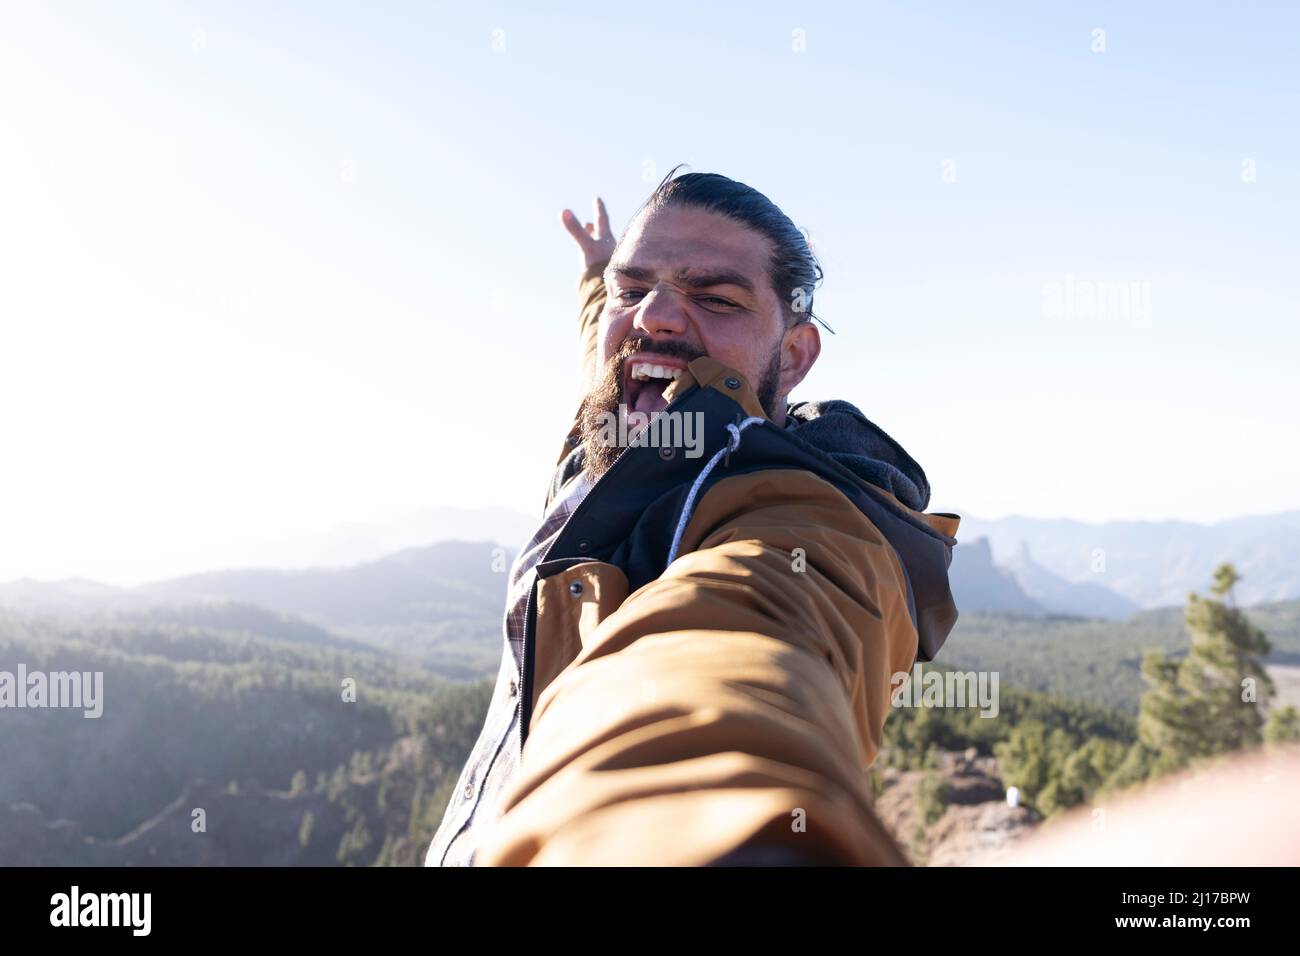 Man with mouth open taking selfie on sunny day Stock Photo